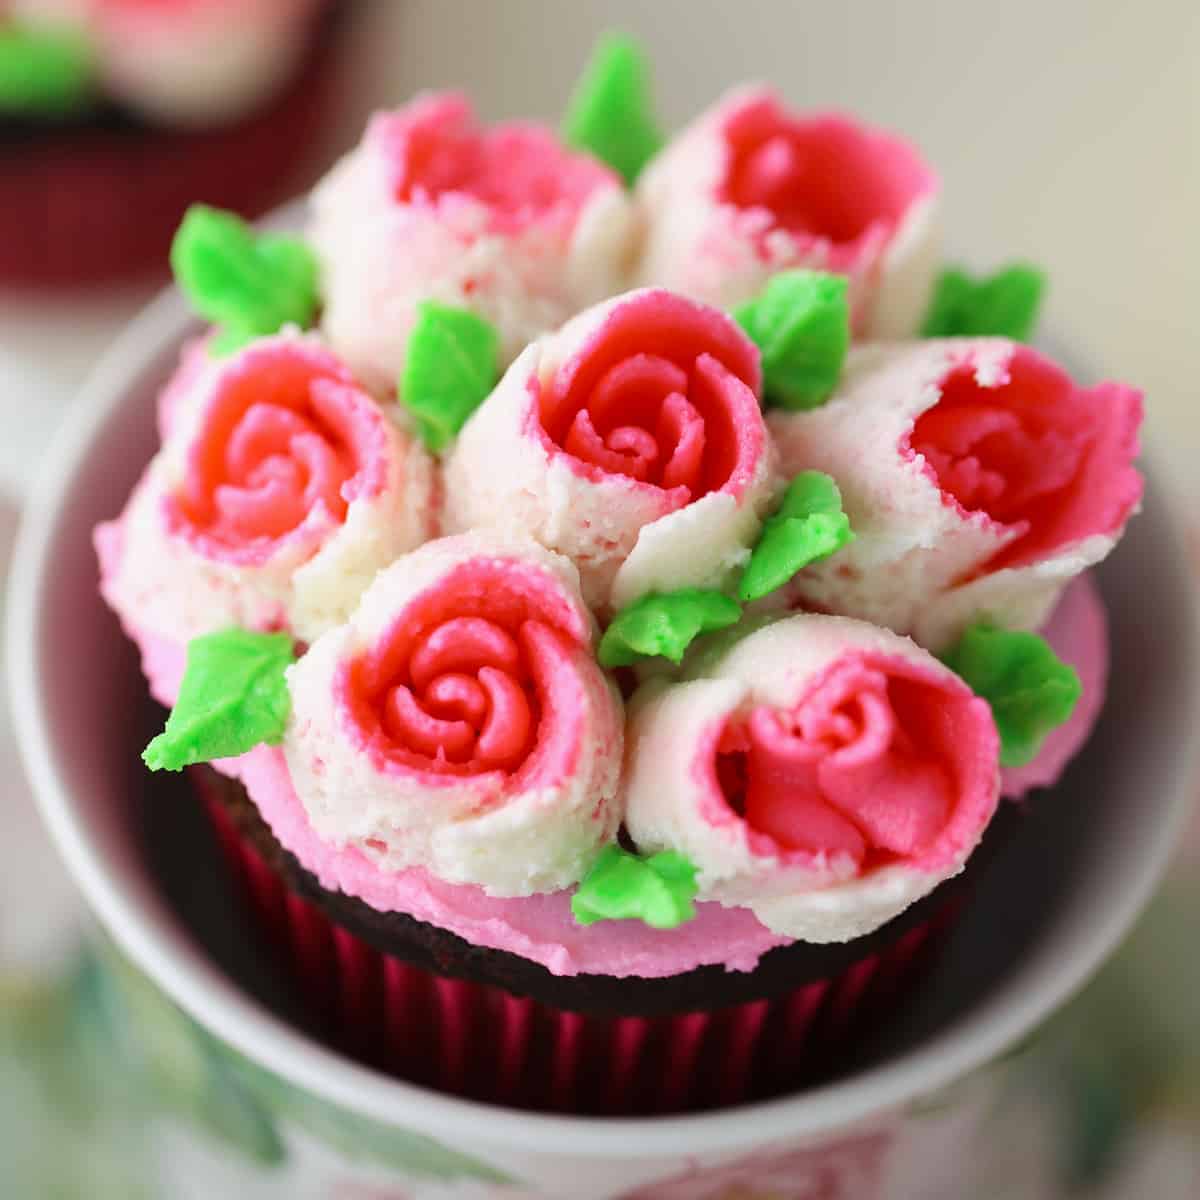 https://www.momlovesbaking.com/wp-content/uploads/2017/05/Rose-Cupcakes-with-Russian-Pastry-Tips-SQ.jpg